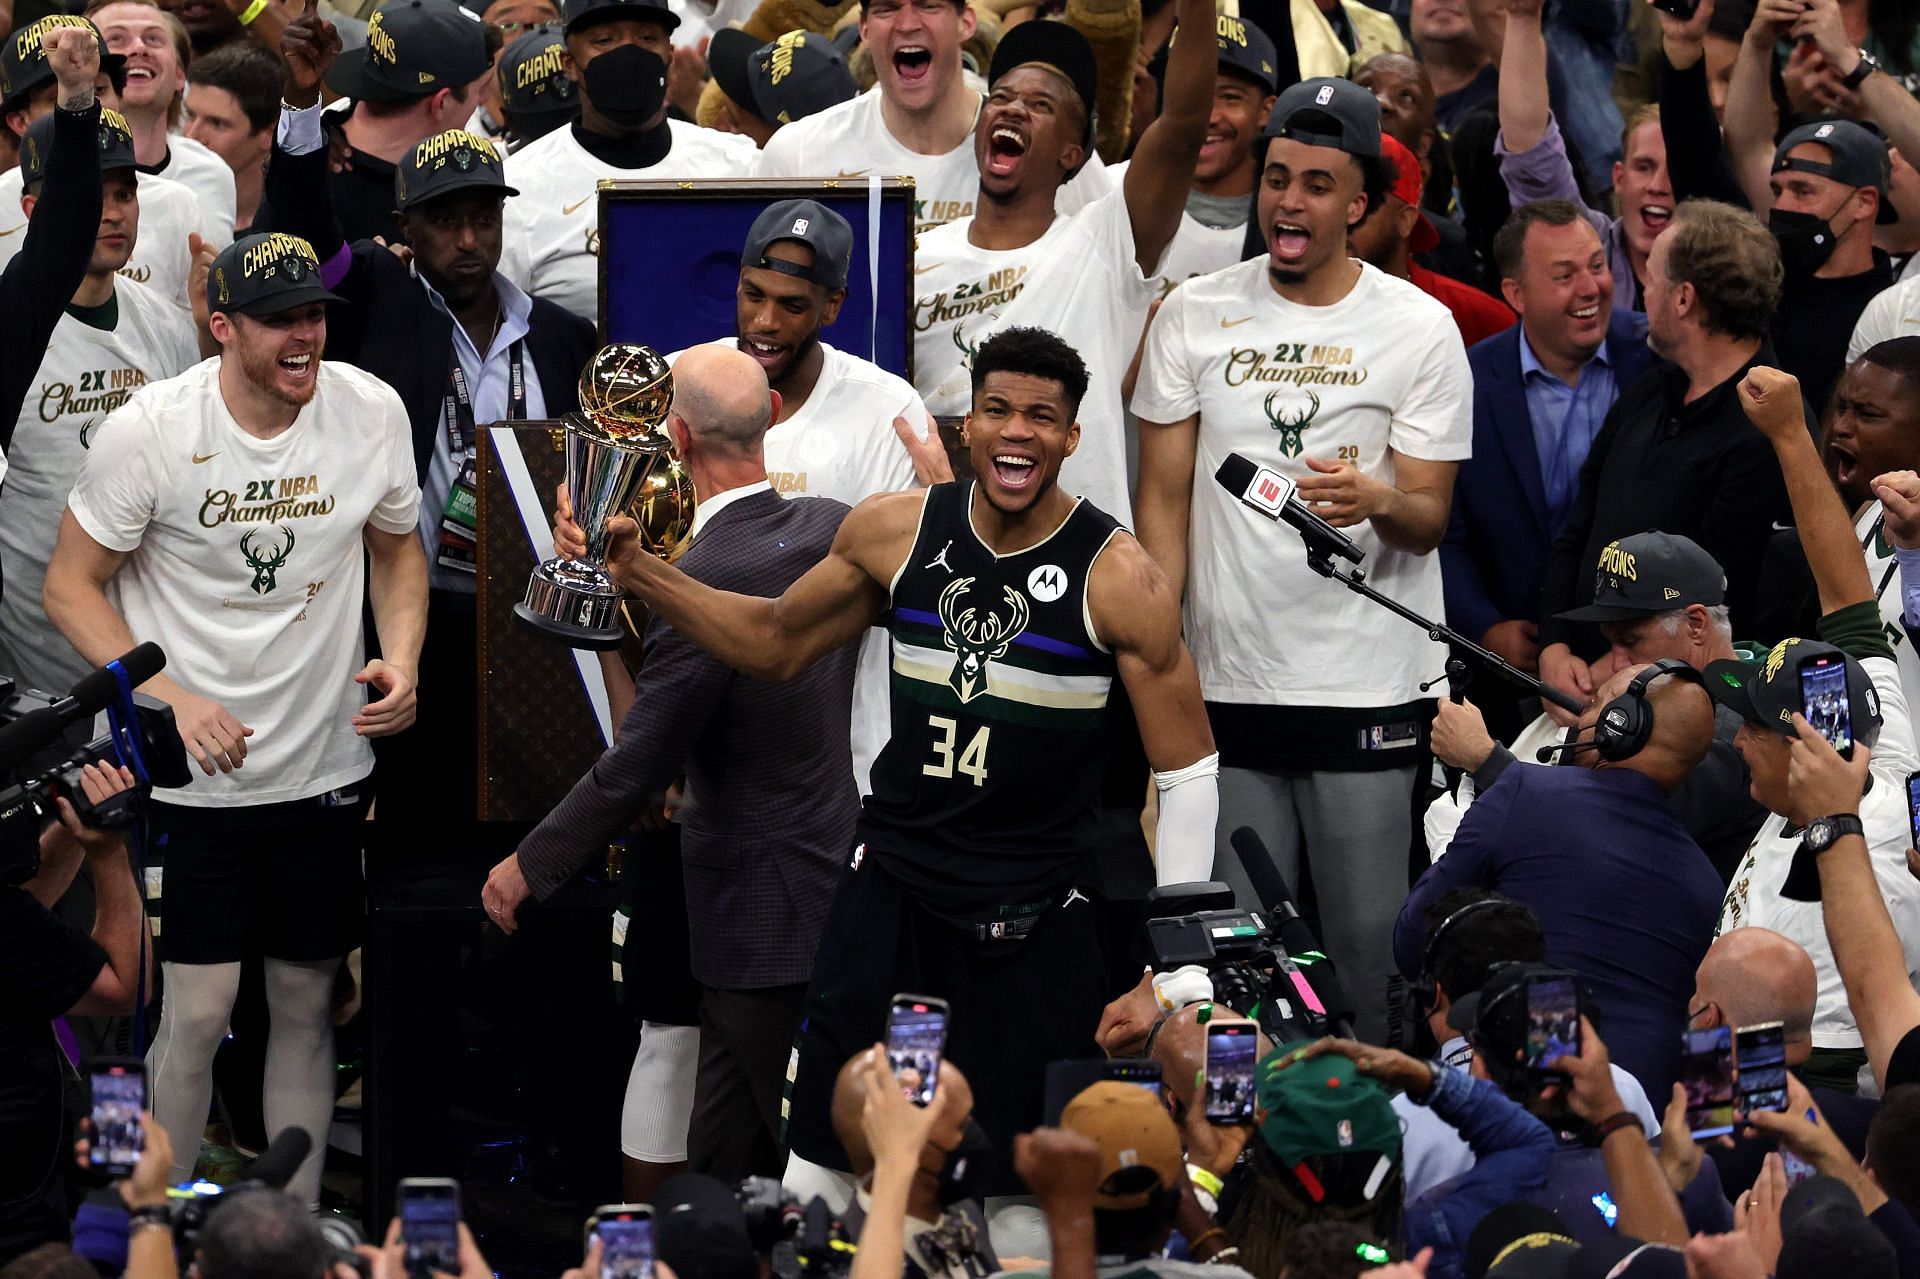 Giannis Antetokounmpo after winning the 2021 NBA Championship